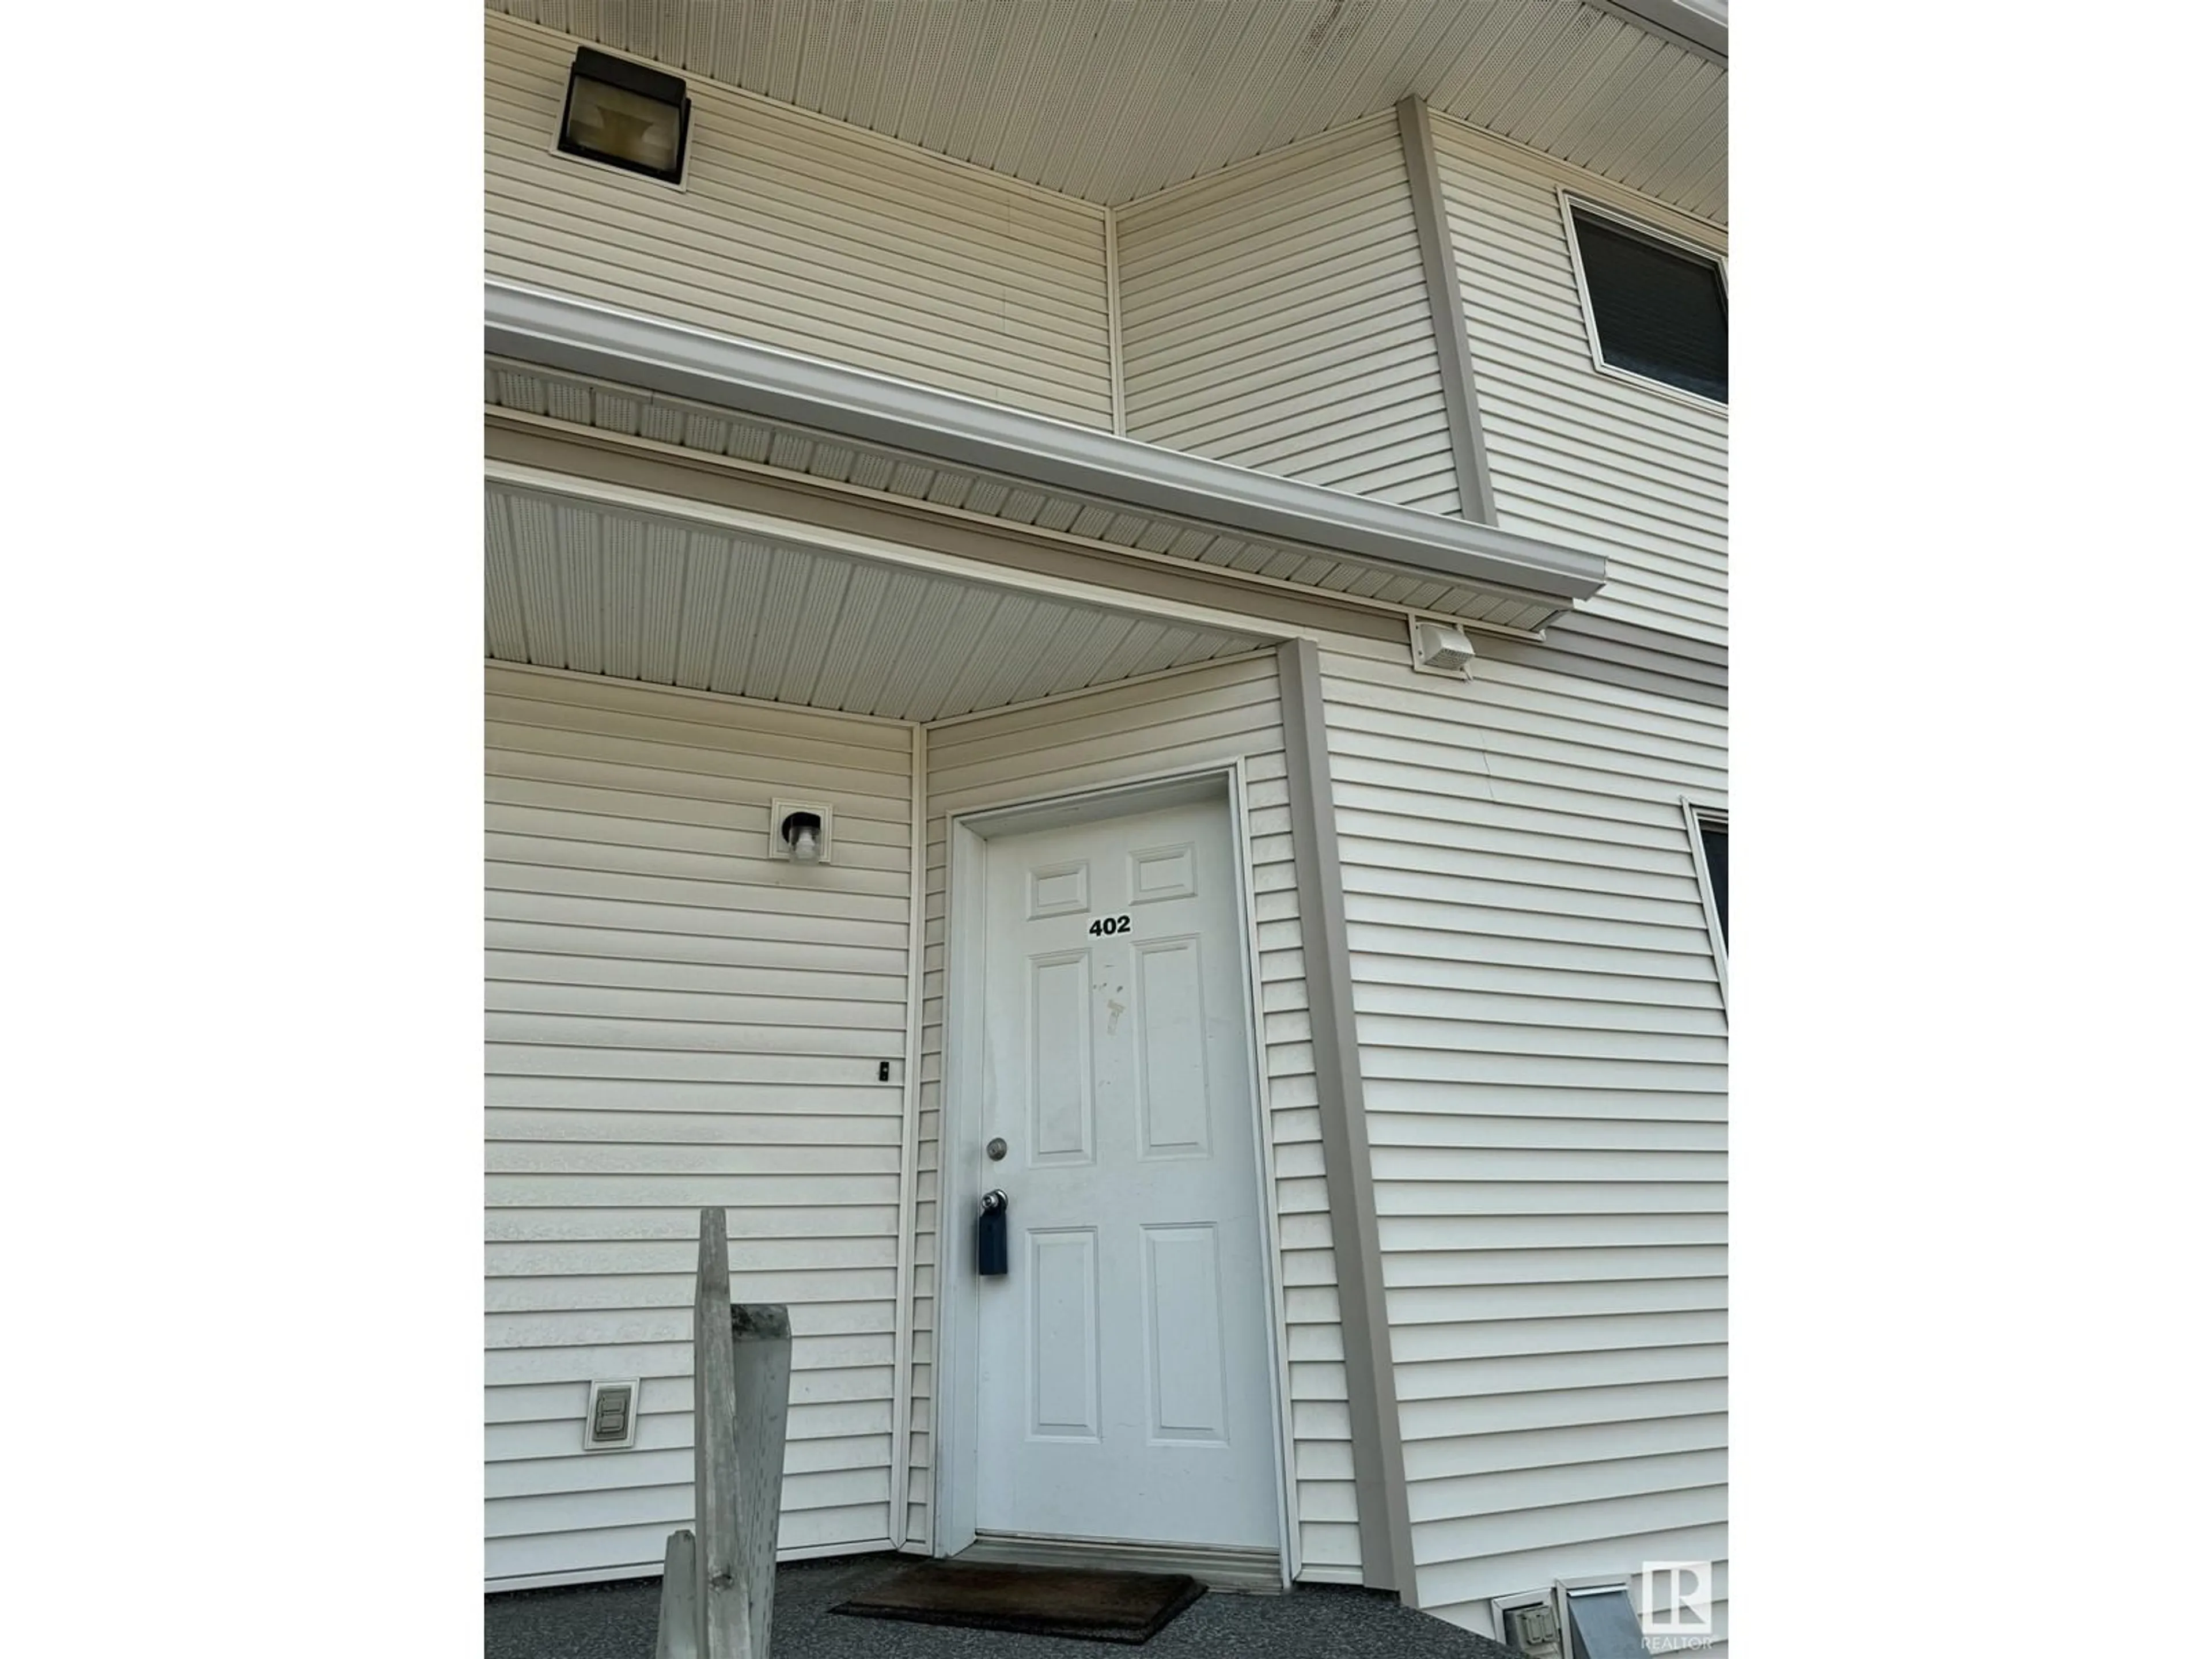 A pic from exterior of the house or condo for #402 801 BOTHWELL DR, Sherwood Park Alberta T8H2W3